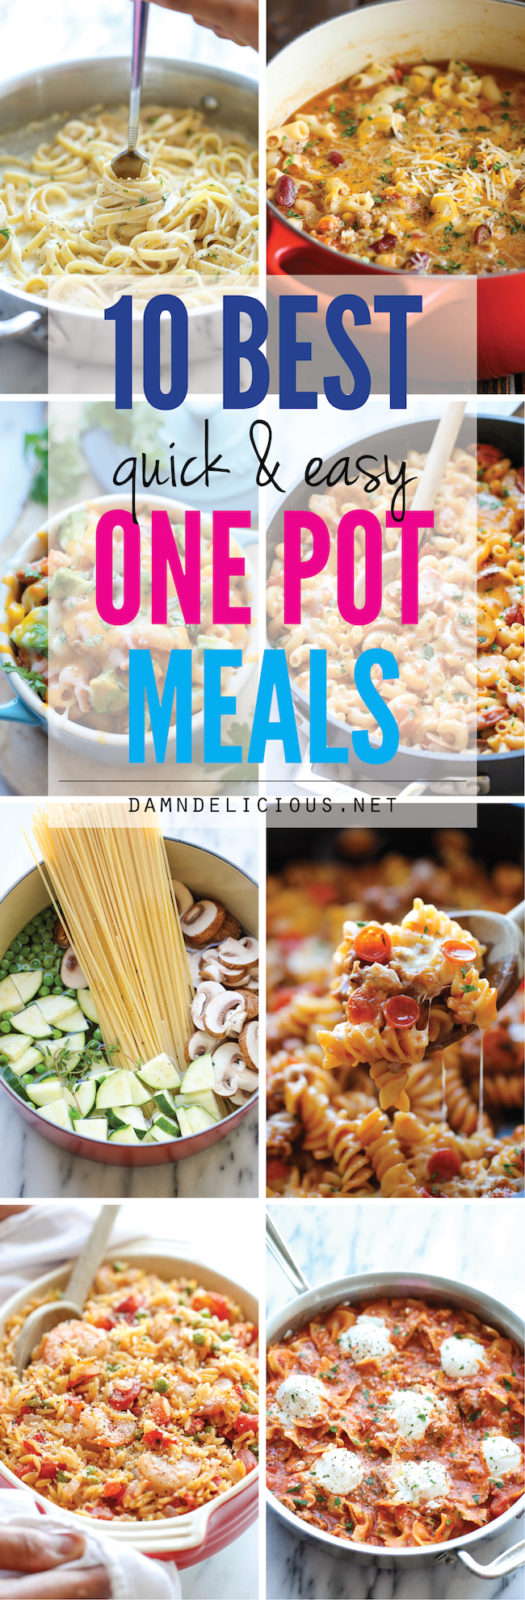 10 Best Quick And Easy One Pot Meals 525x1600 